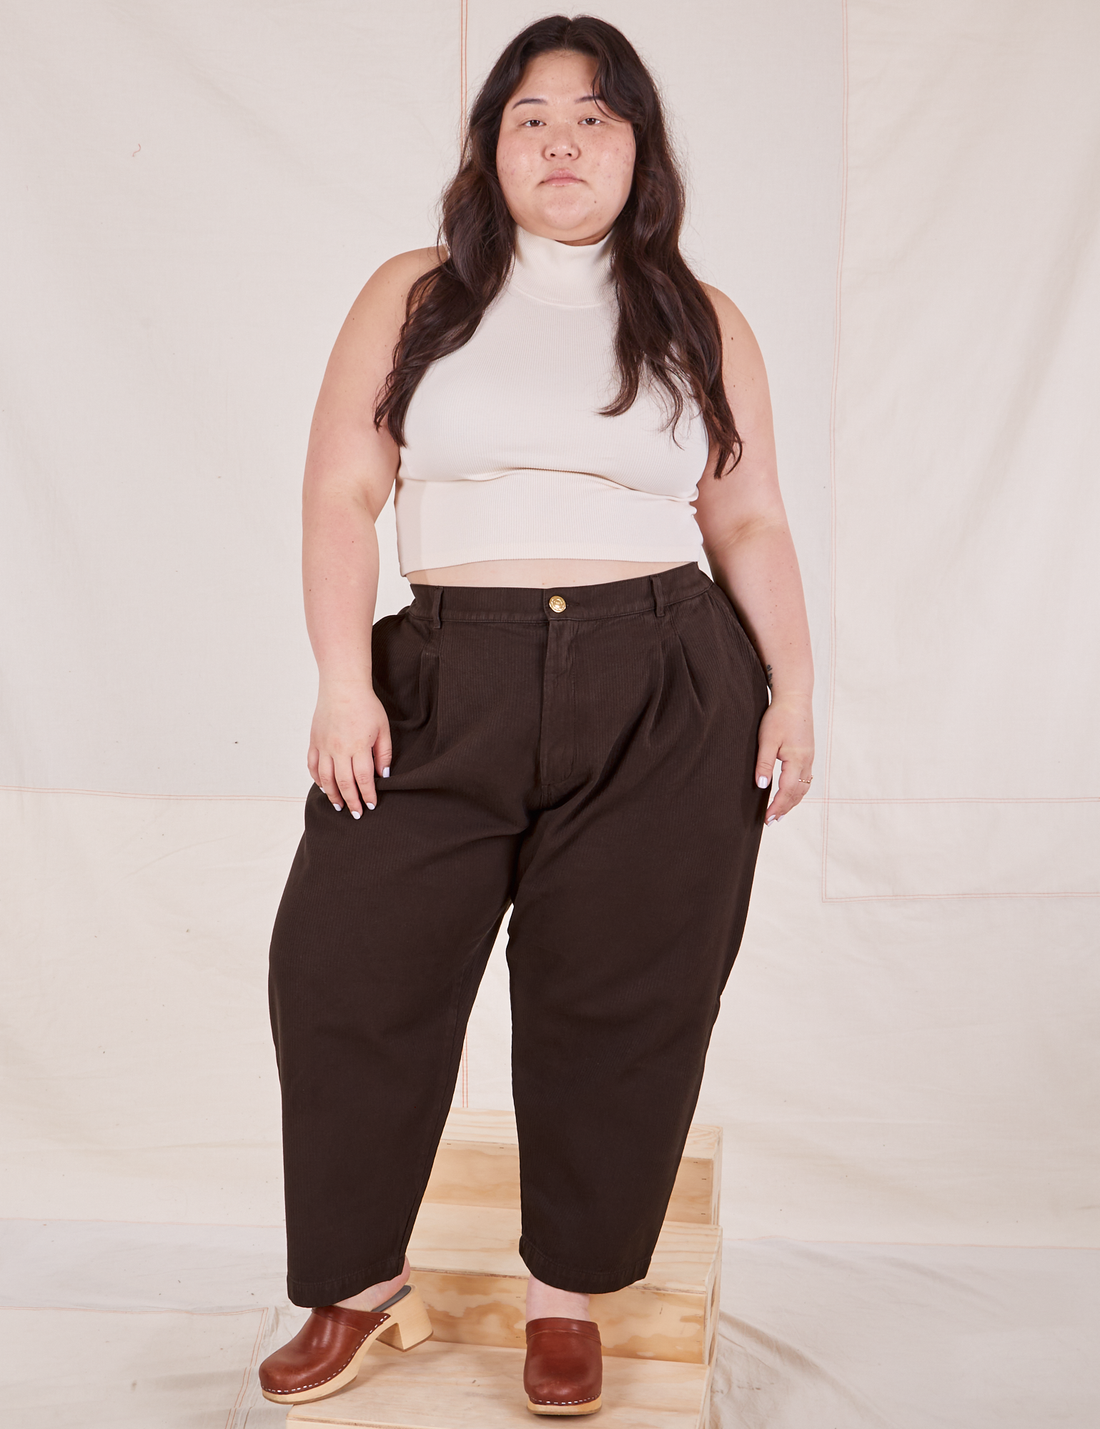 Ashley is 5'7" and wearing 1XL Petite Heritage Trousers in Espresso Brown paired with vintage off-white Sleeveless Turtleneck